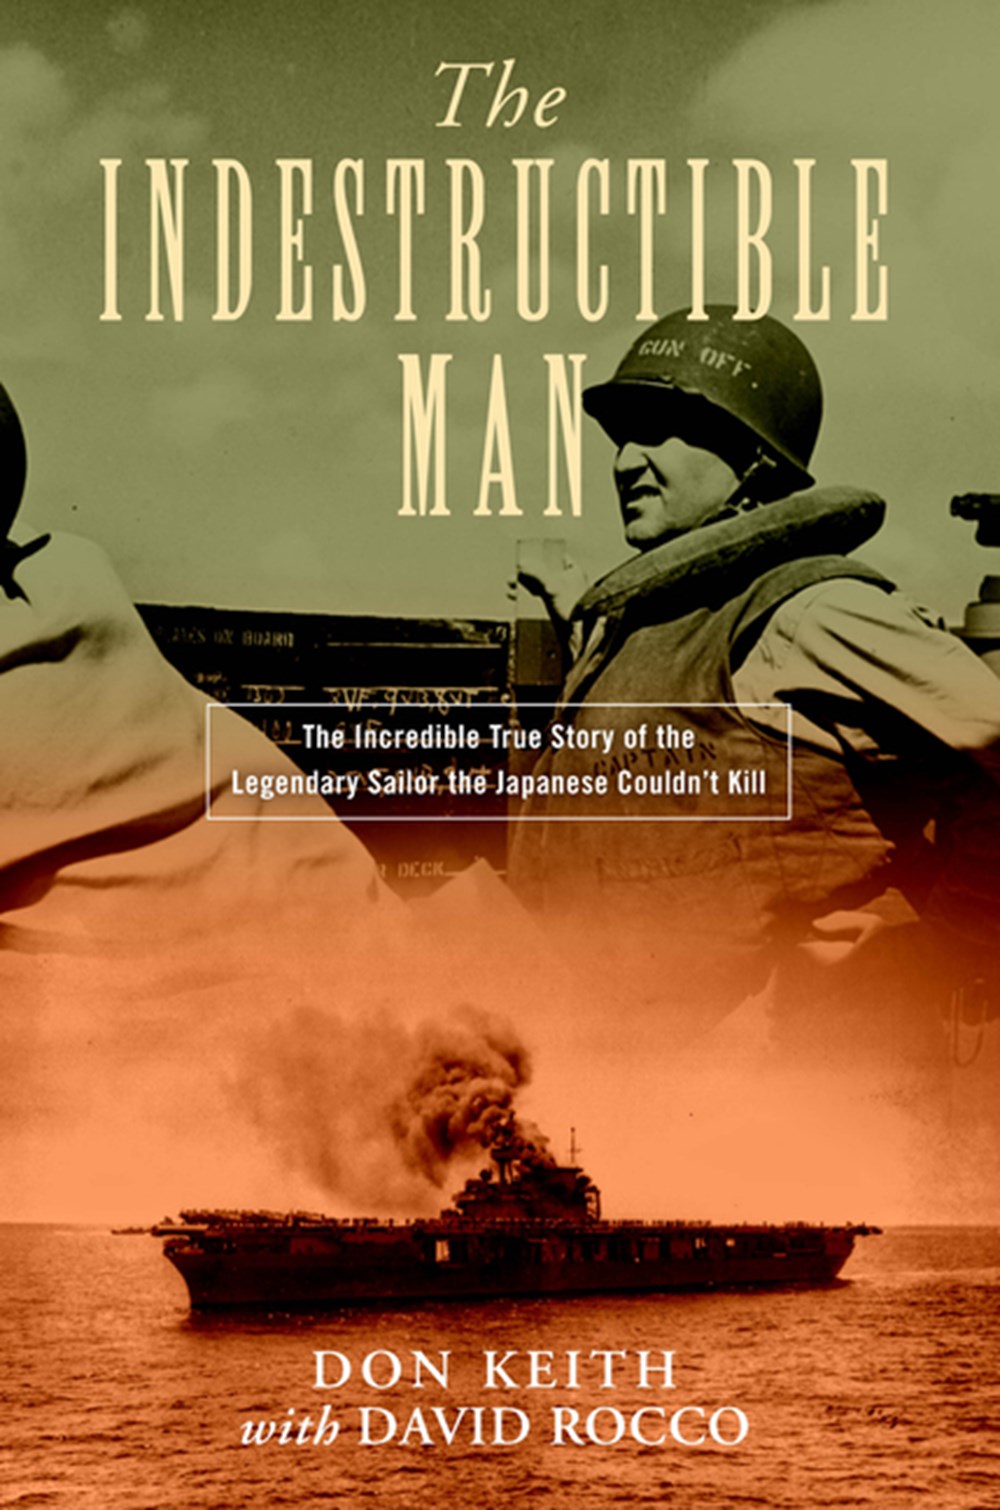 Indestructible Man: The Incredible True Story of the Legendary Sailor the Japanese Couldn't Kill